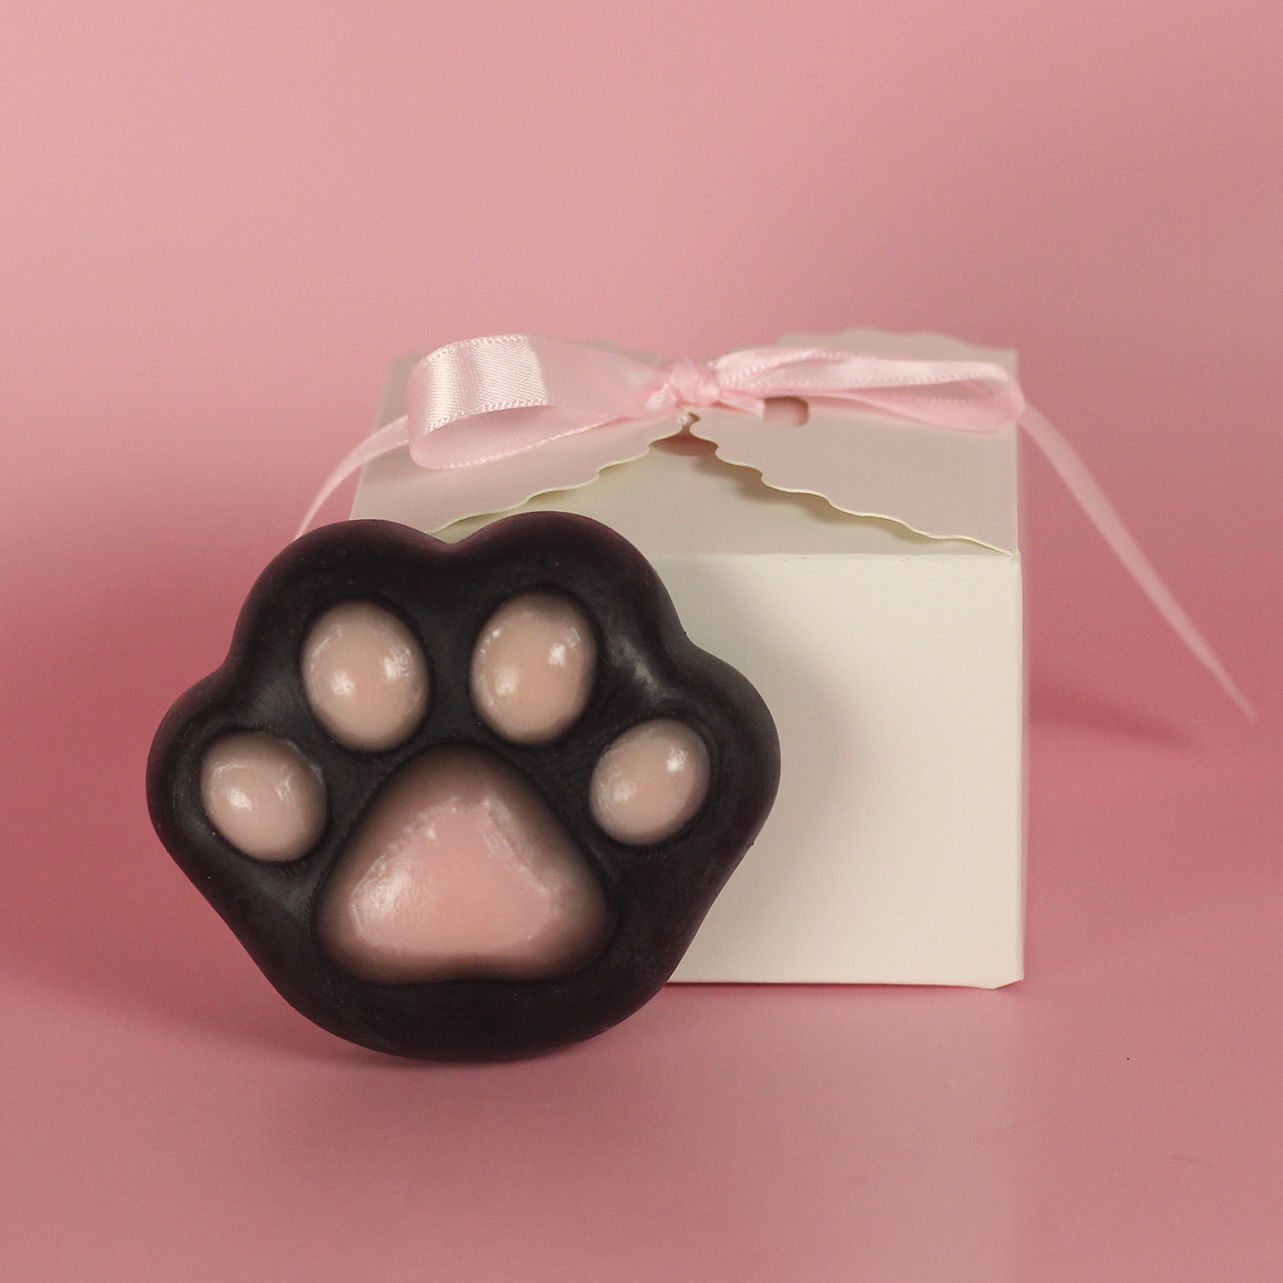 Toe Beans Soap - Frolic Creations - Soap - Cute Self Care - Kawaii Atheistic - Quirky Gift - Gift For Her